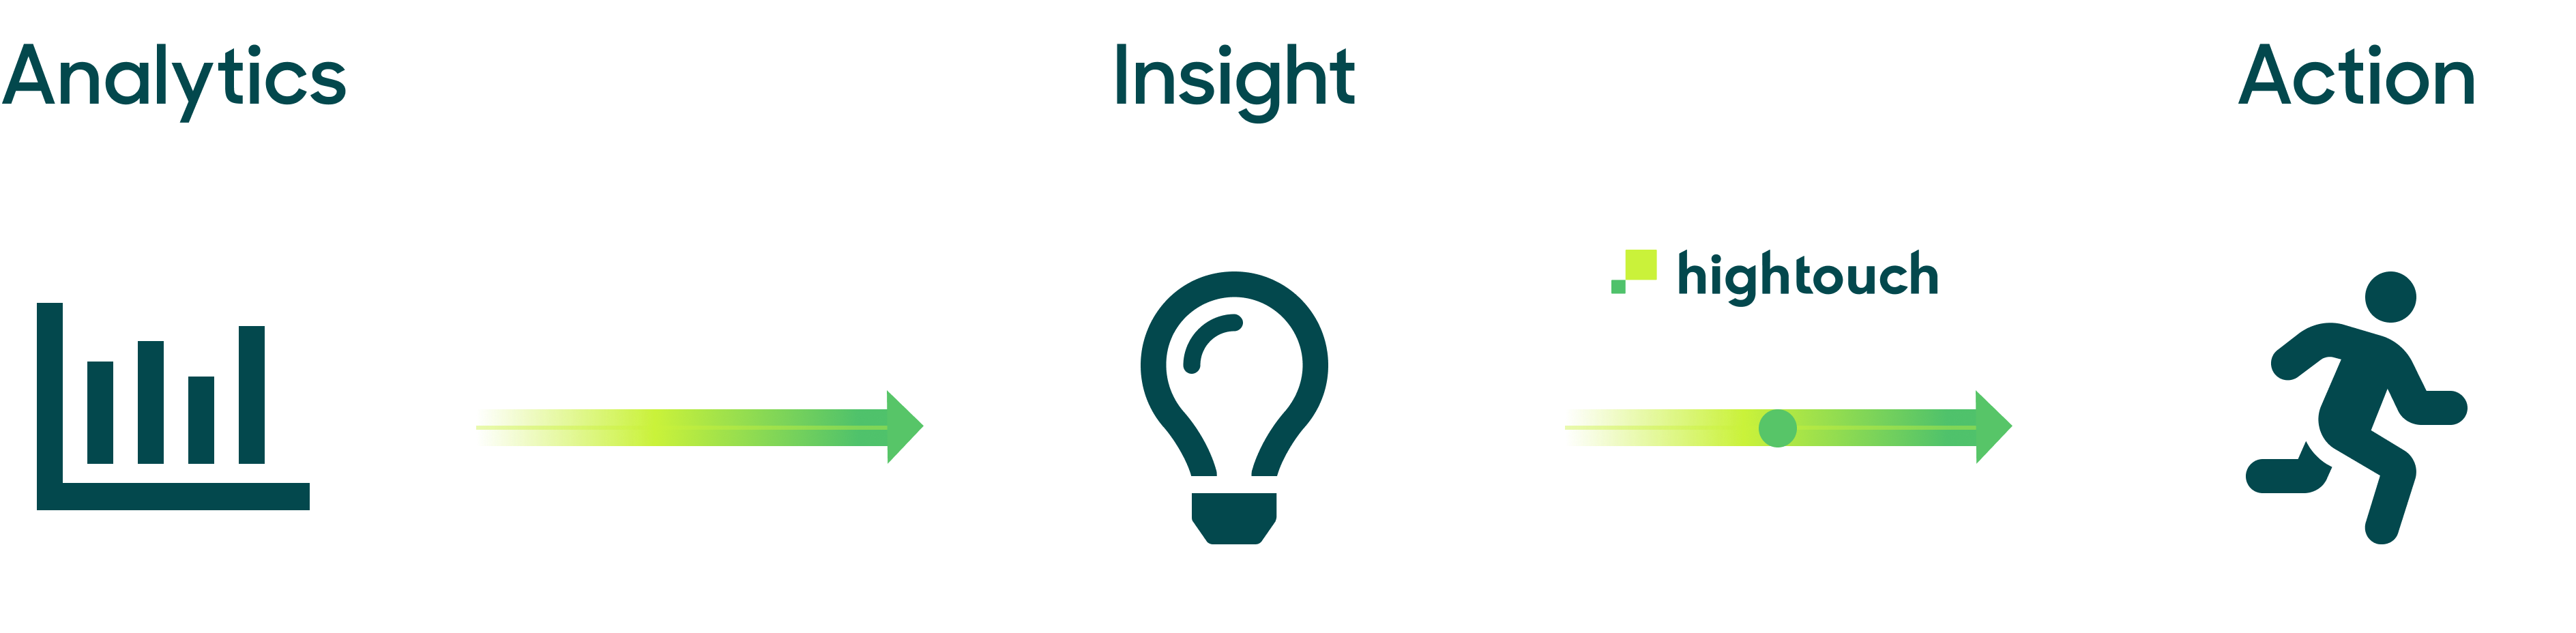 How Hightouch simplifies insights to action